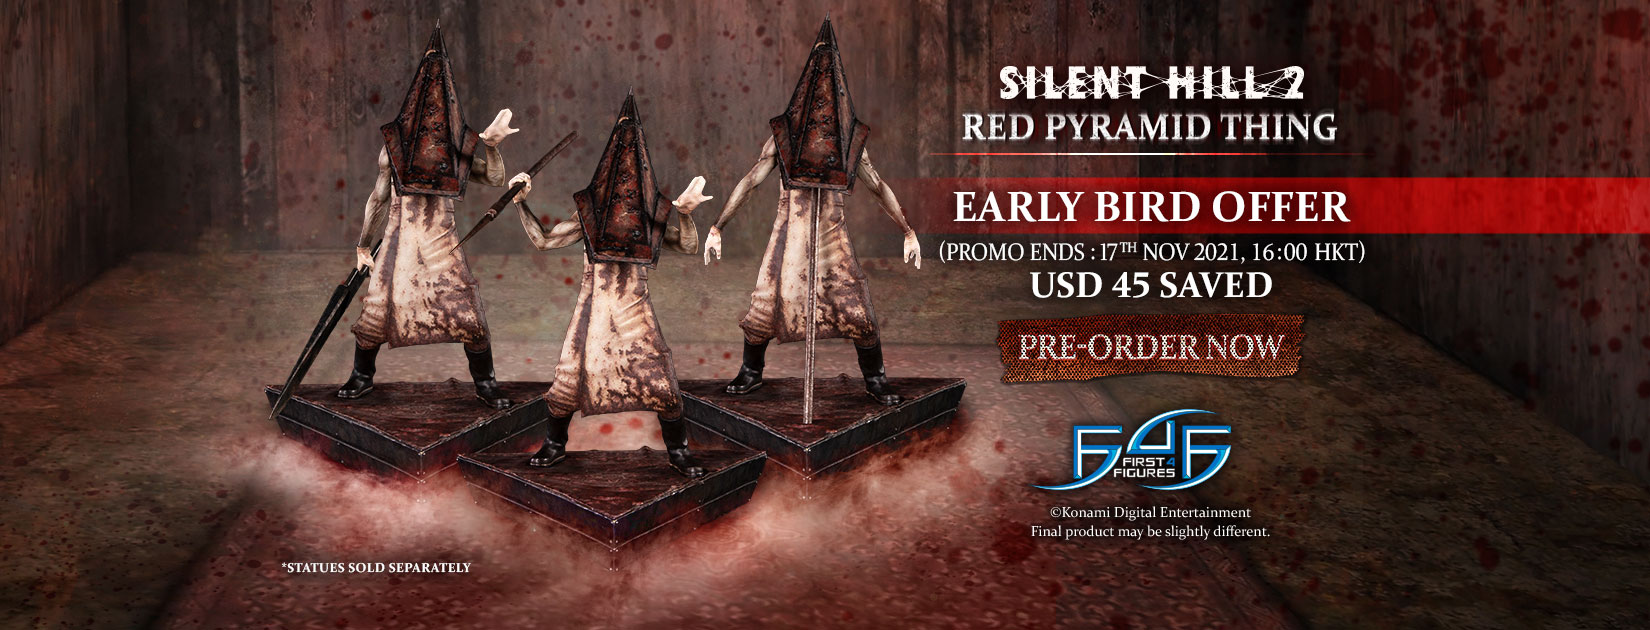 Silent Hill 2 – Red Pyramid Thing statue Early Bird Offer